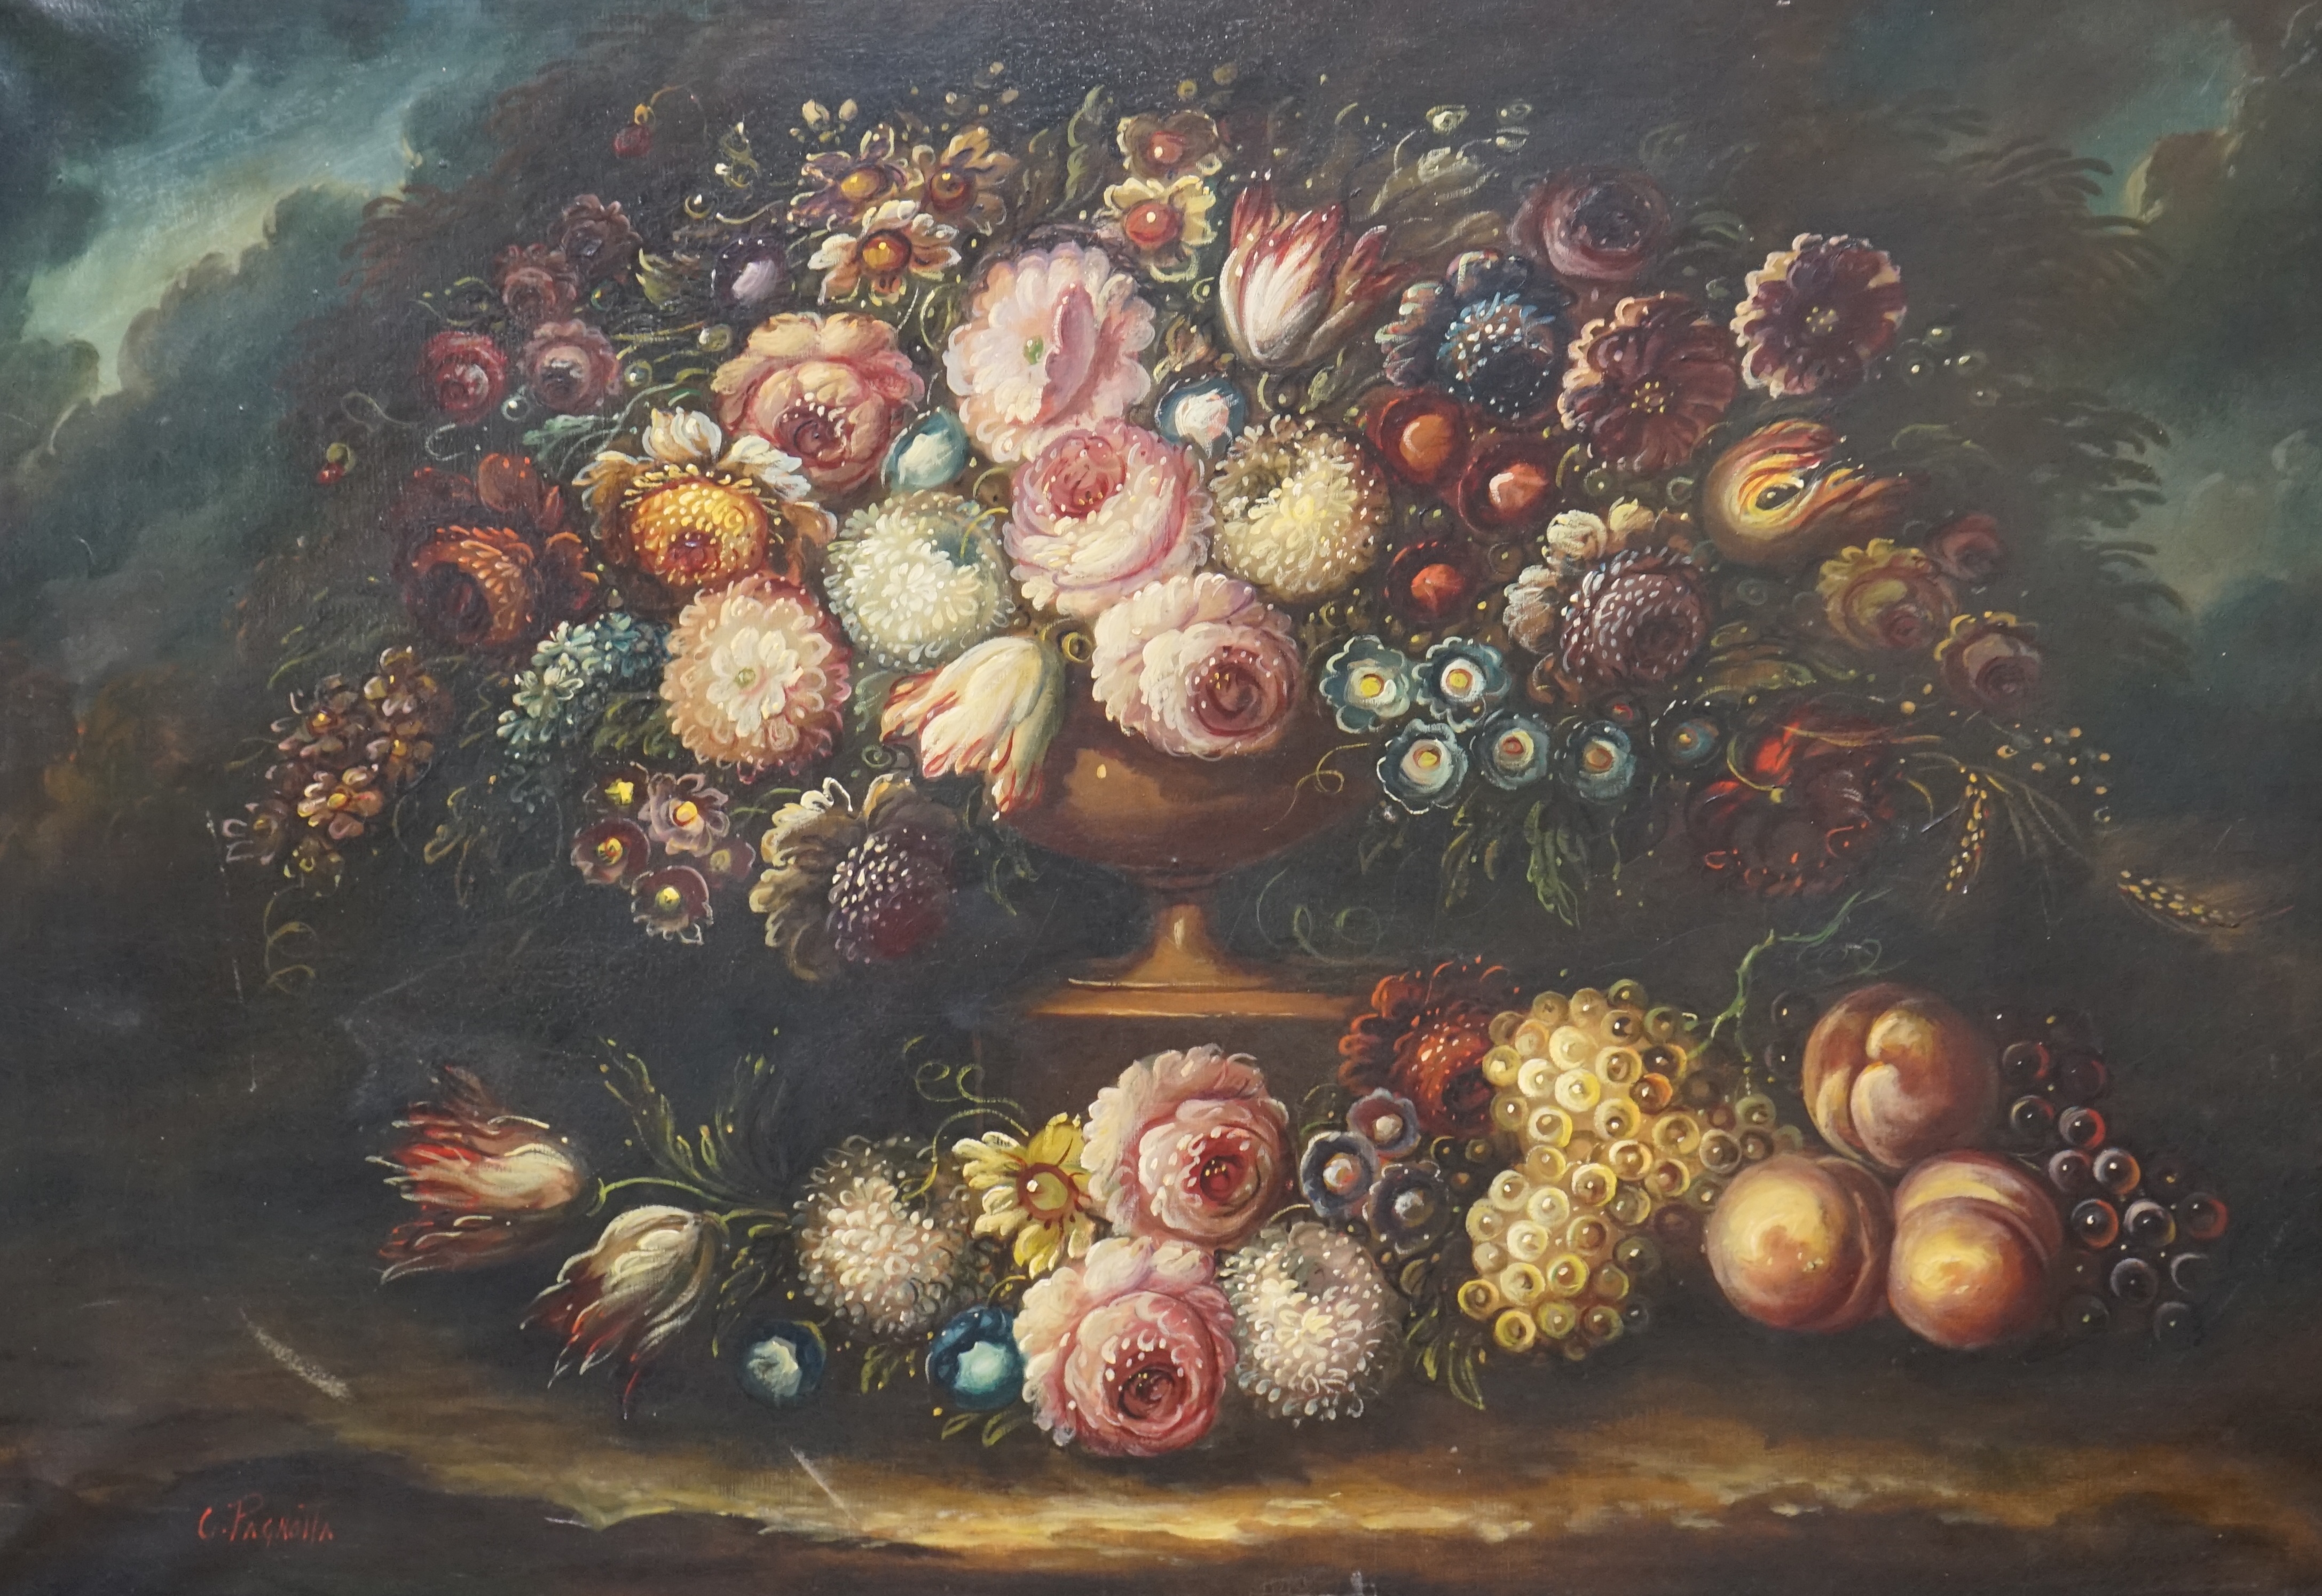 Giuseppe Pagnotta (Italian, b.1941), old master style, oil on canvas, Still life of flowers, signed, 69 x 99cm. Condition - fair, canvas sagging slightly